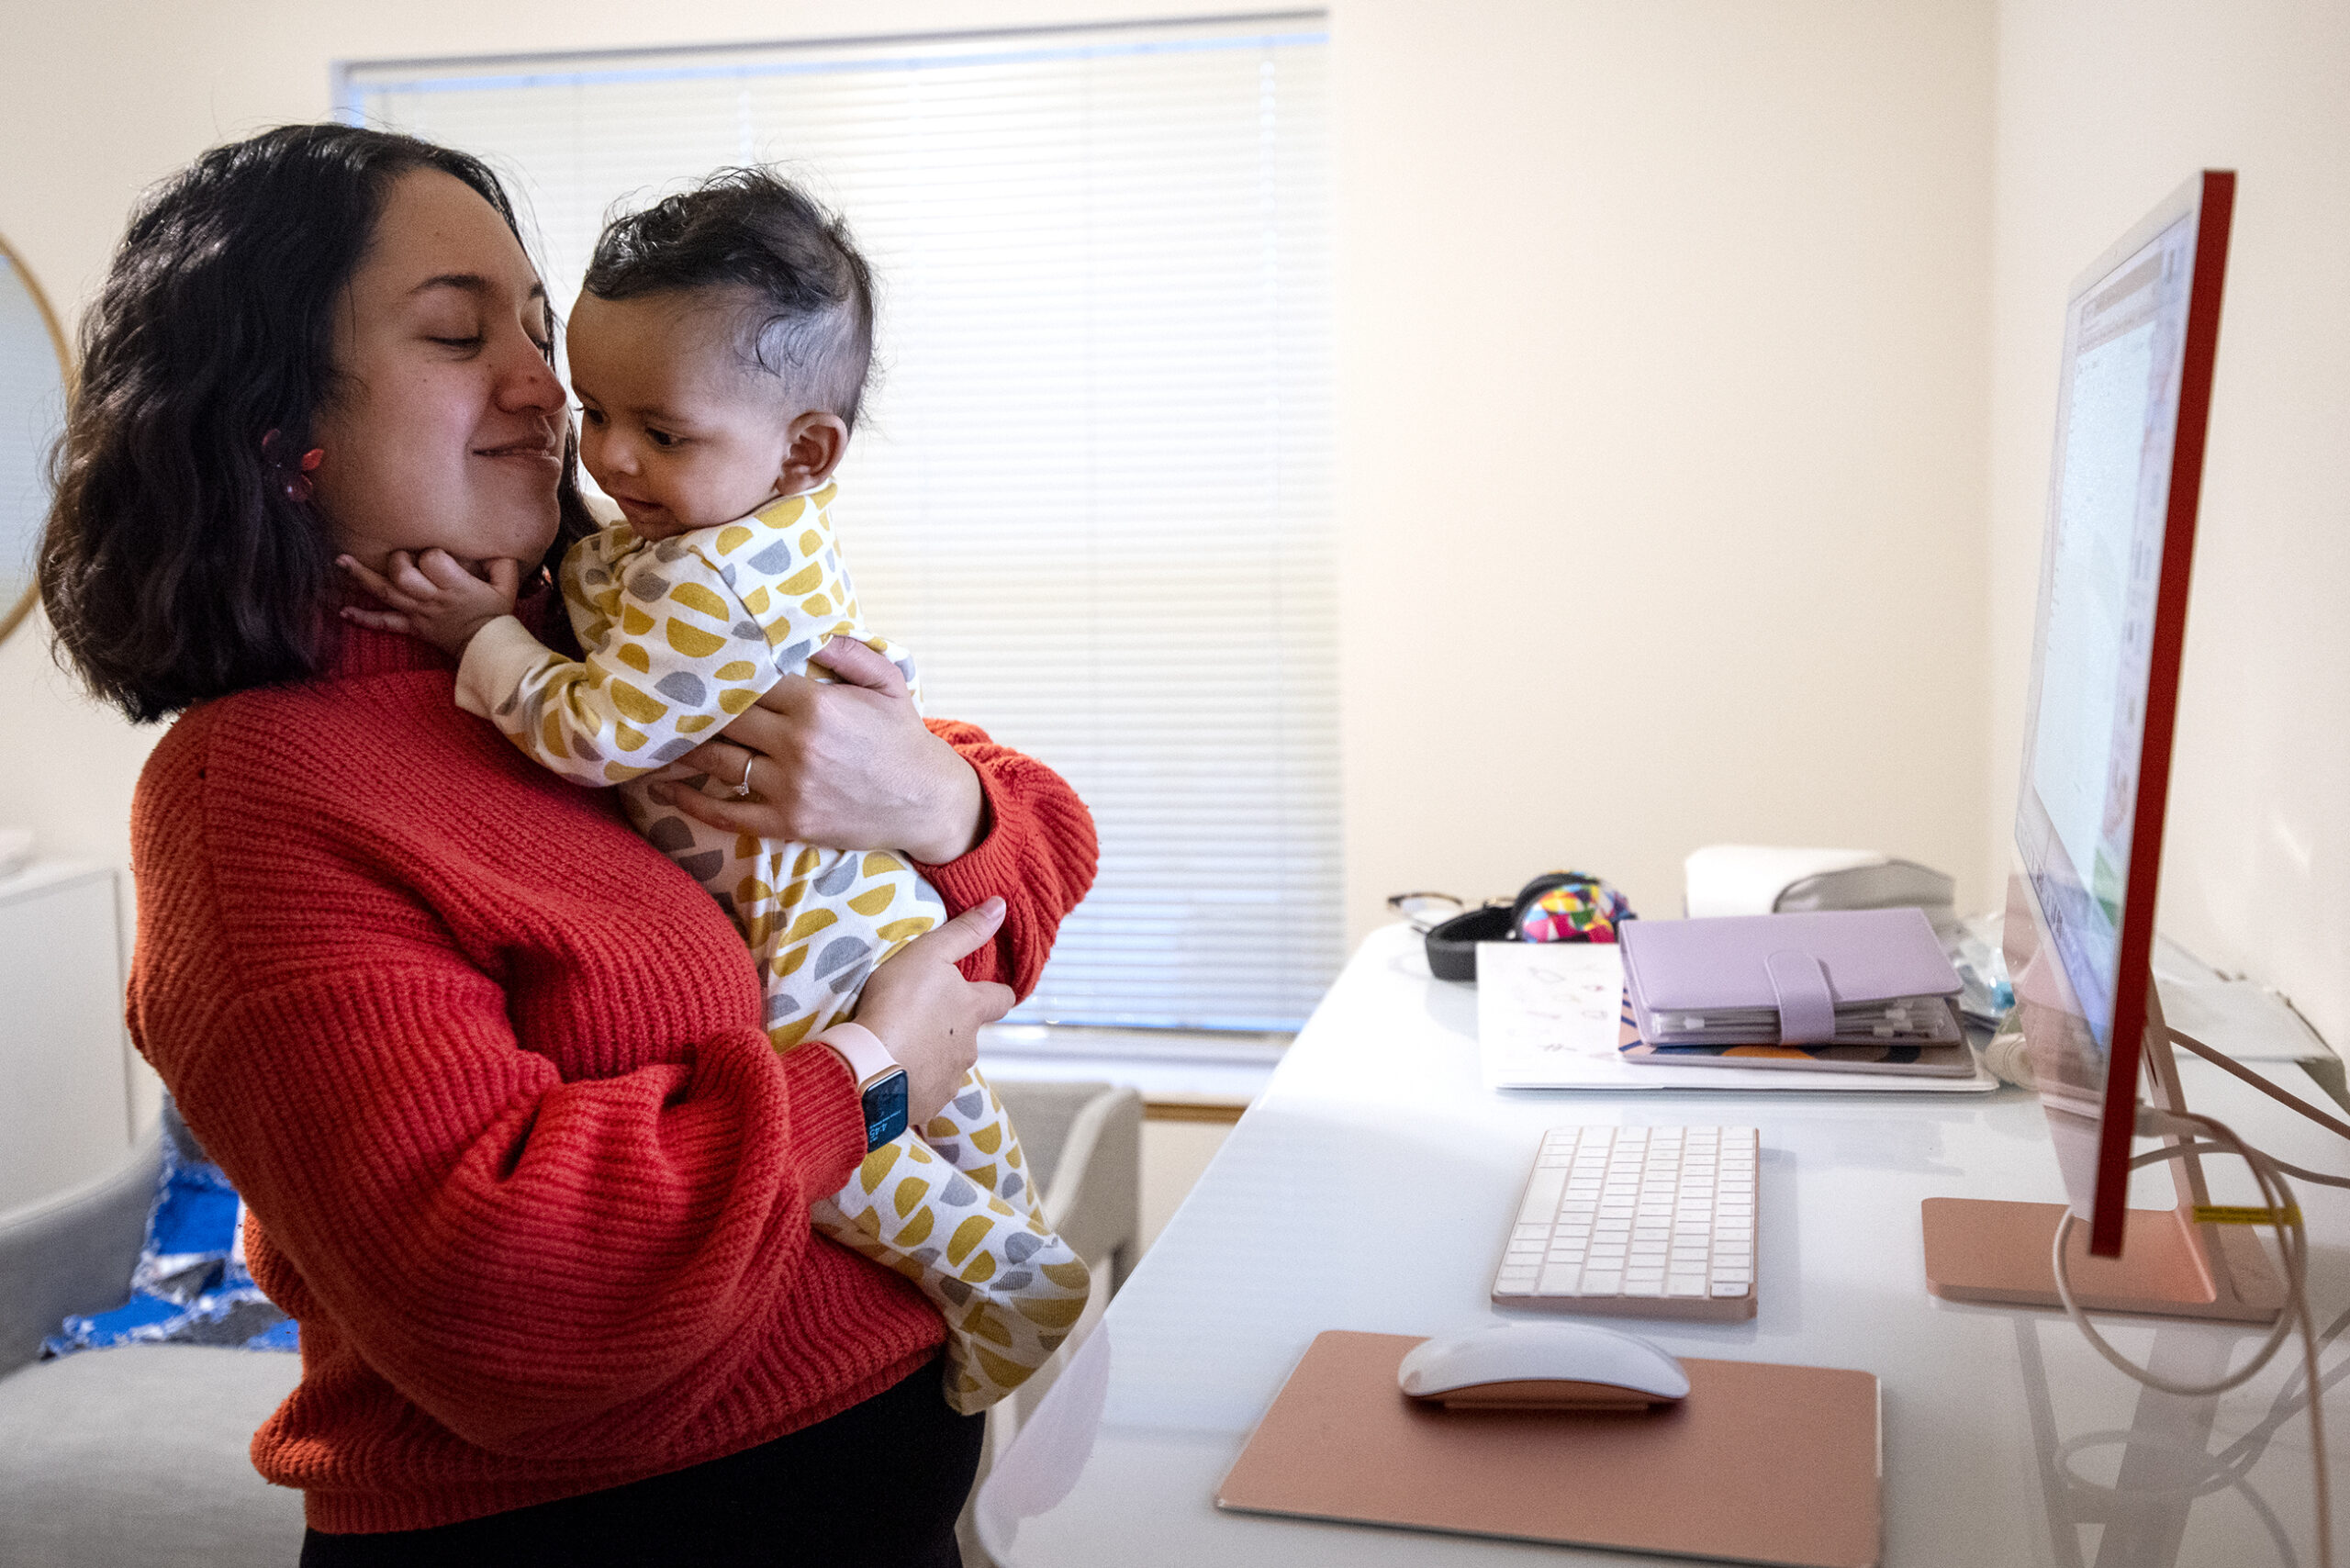 Paid leave bill looks to ease ‘impossible challenges’ faced by caregivers